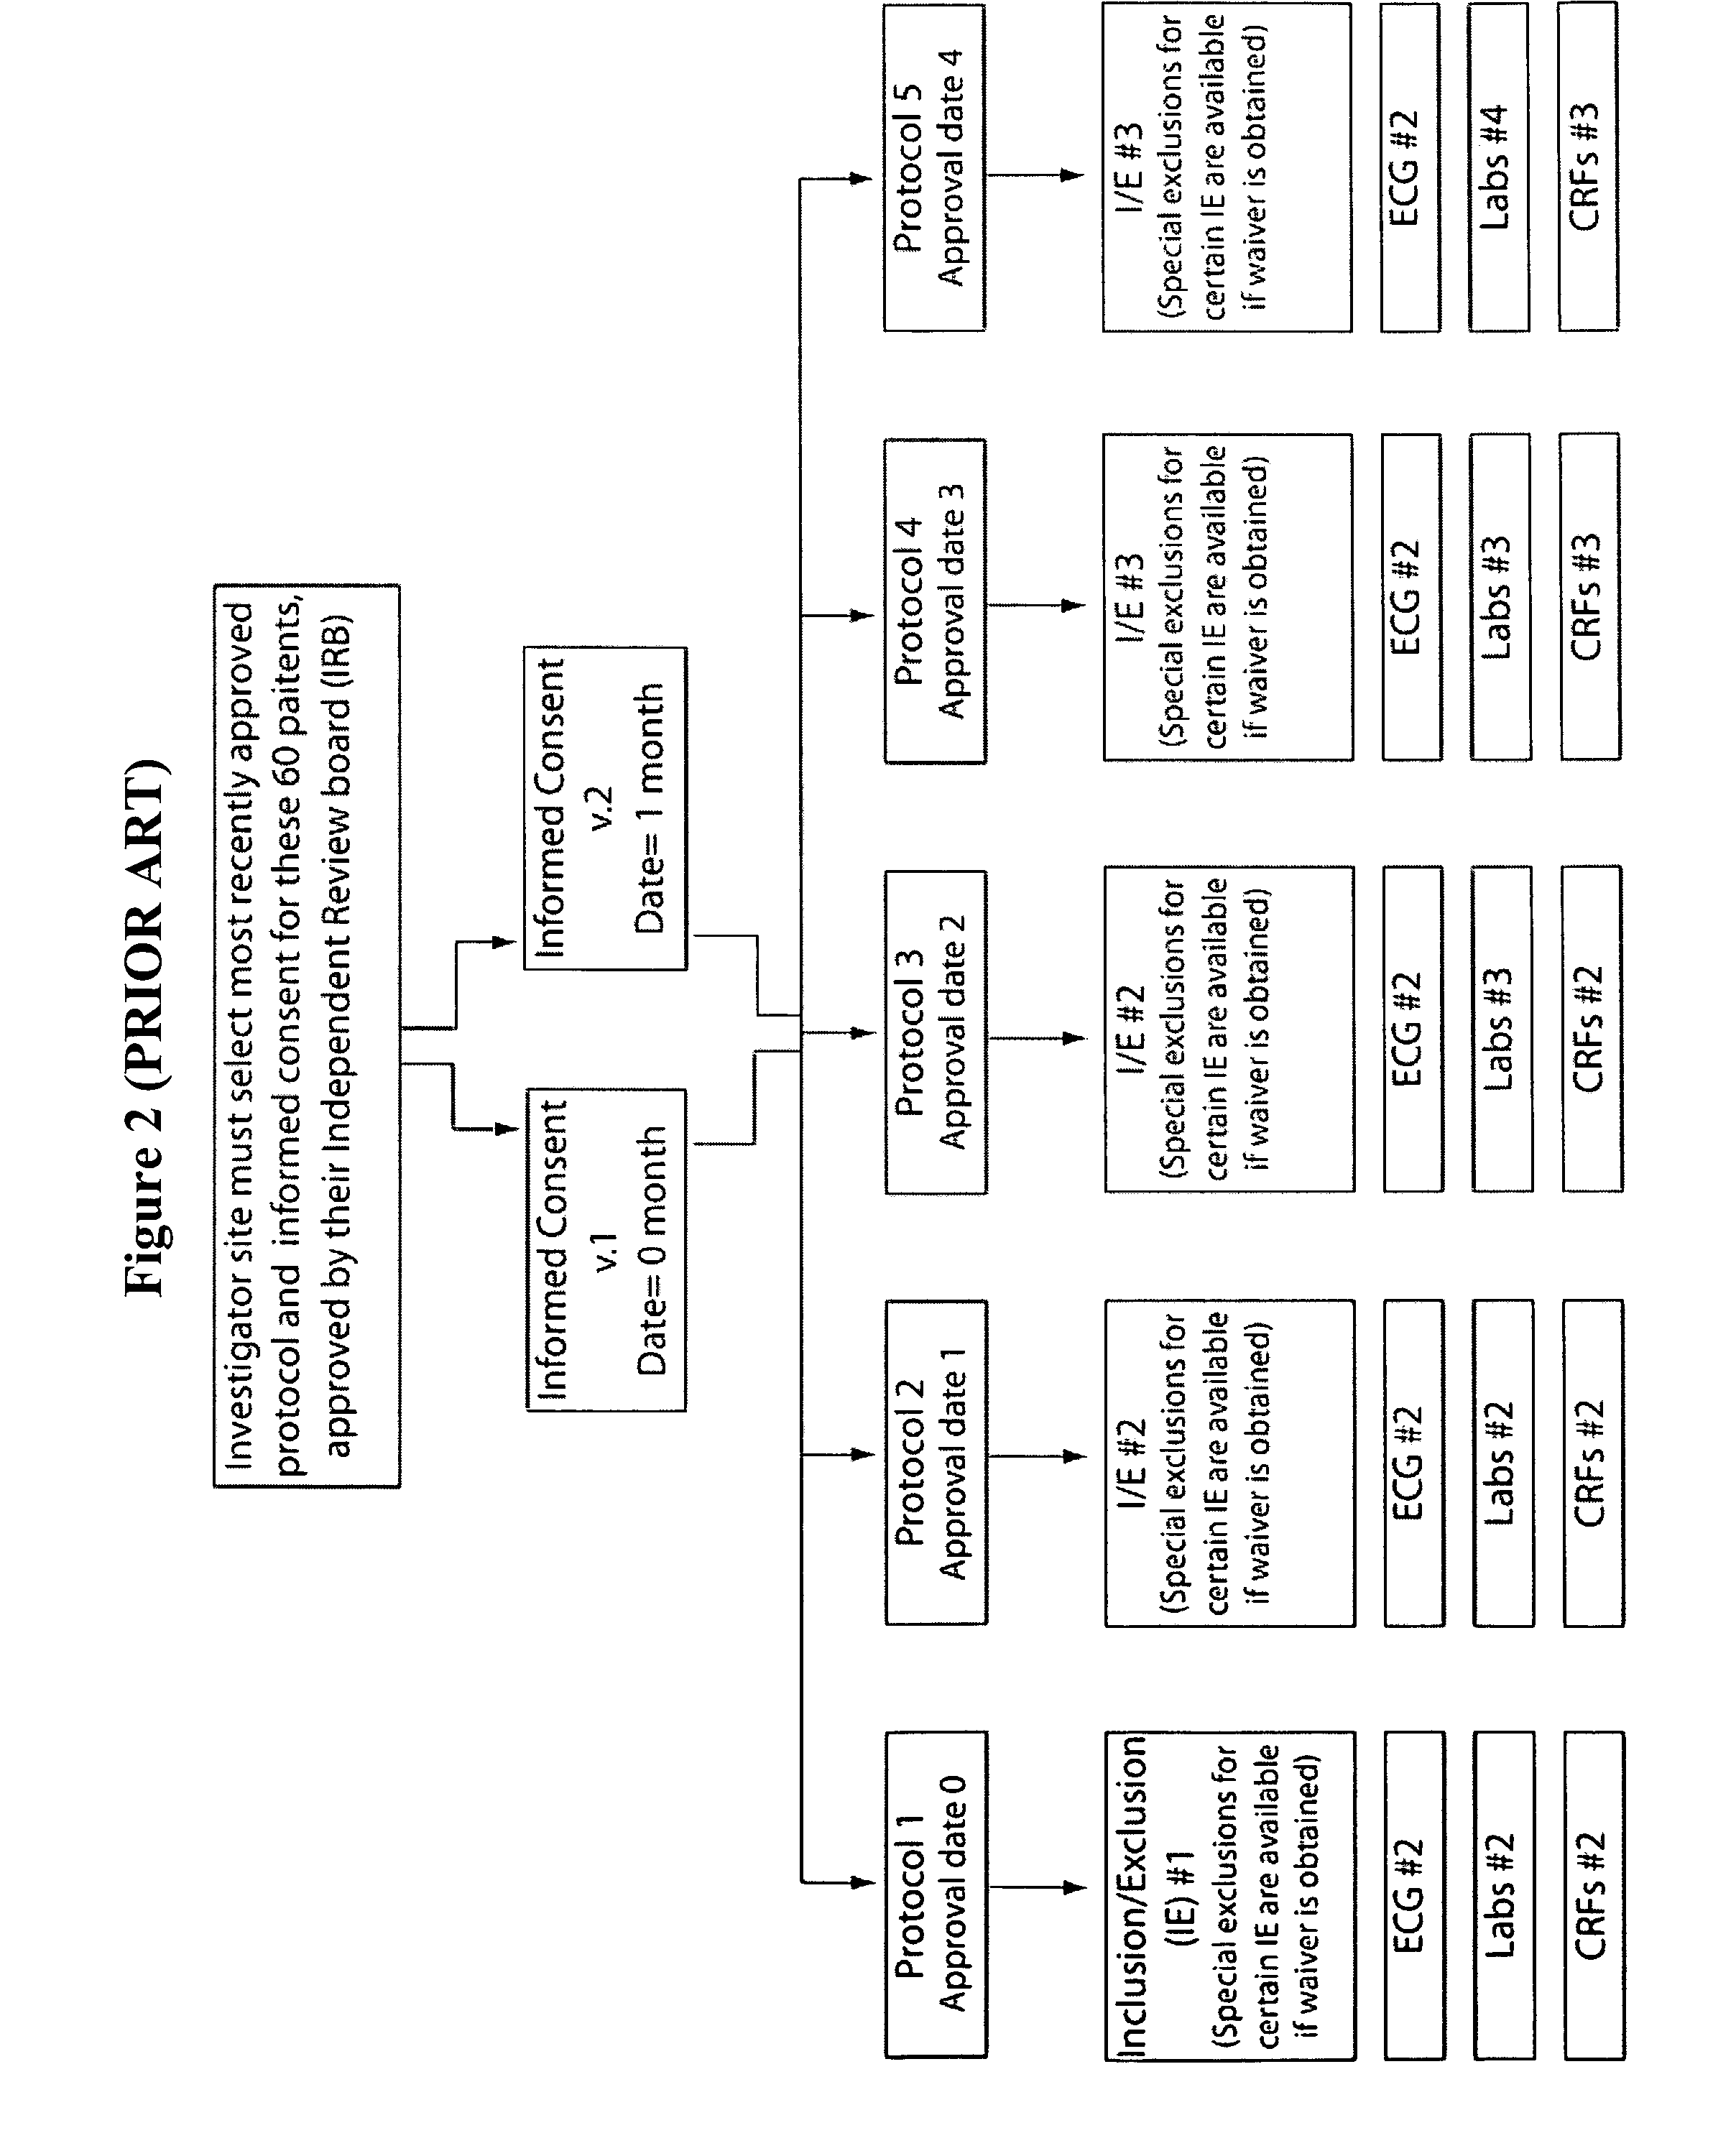 Method and apparatus for screening, enrollment and management of patients in clinical trials